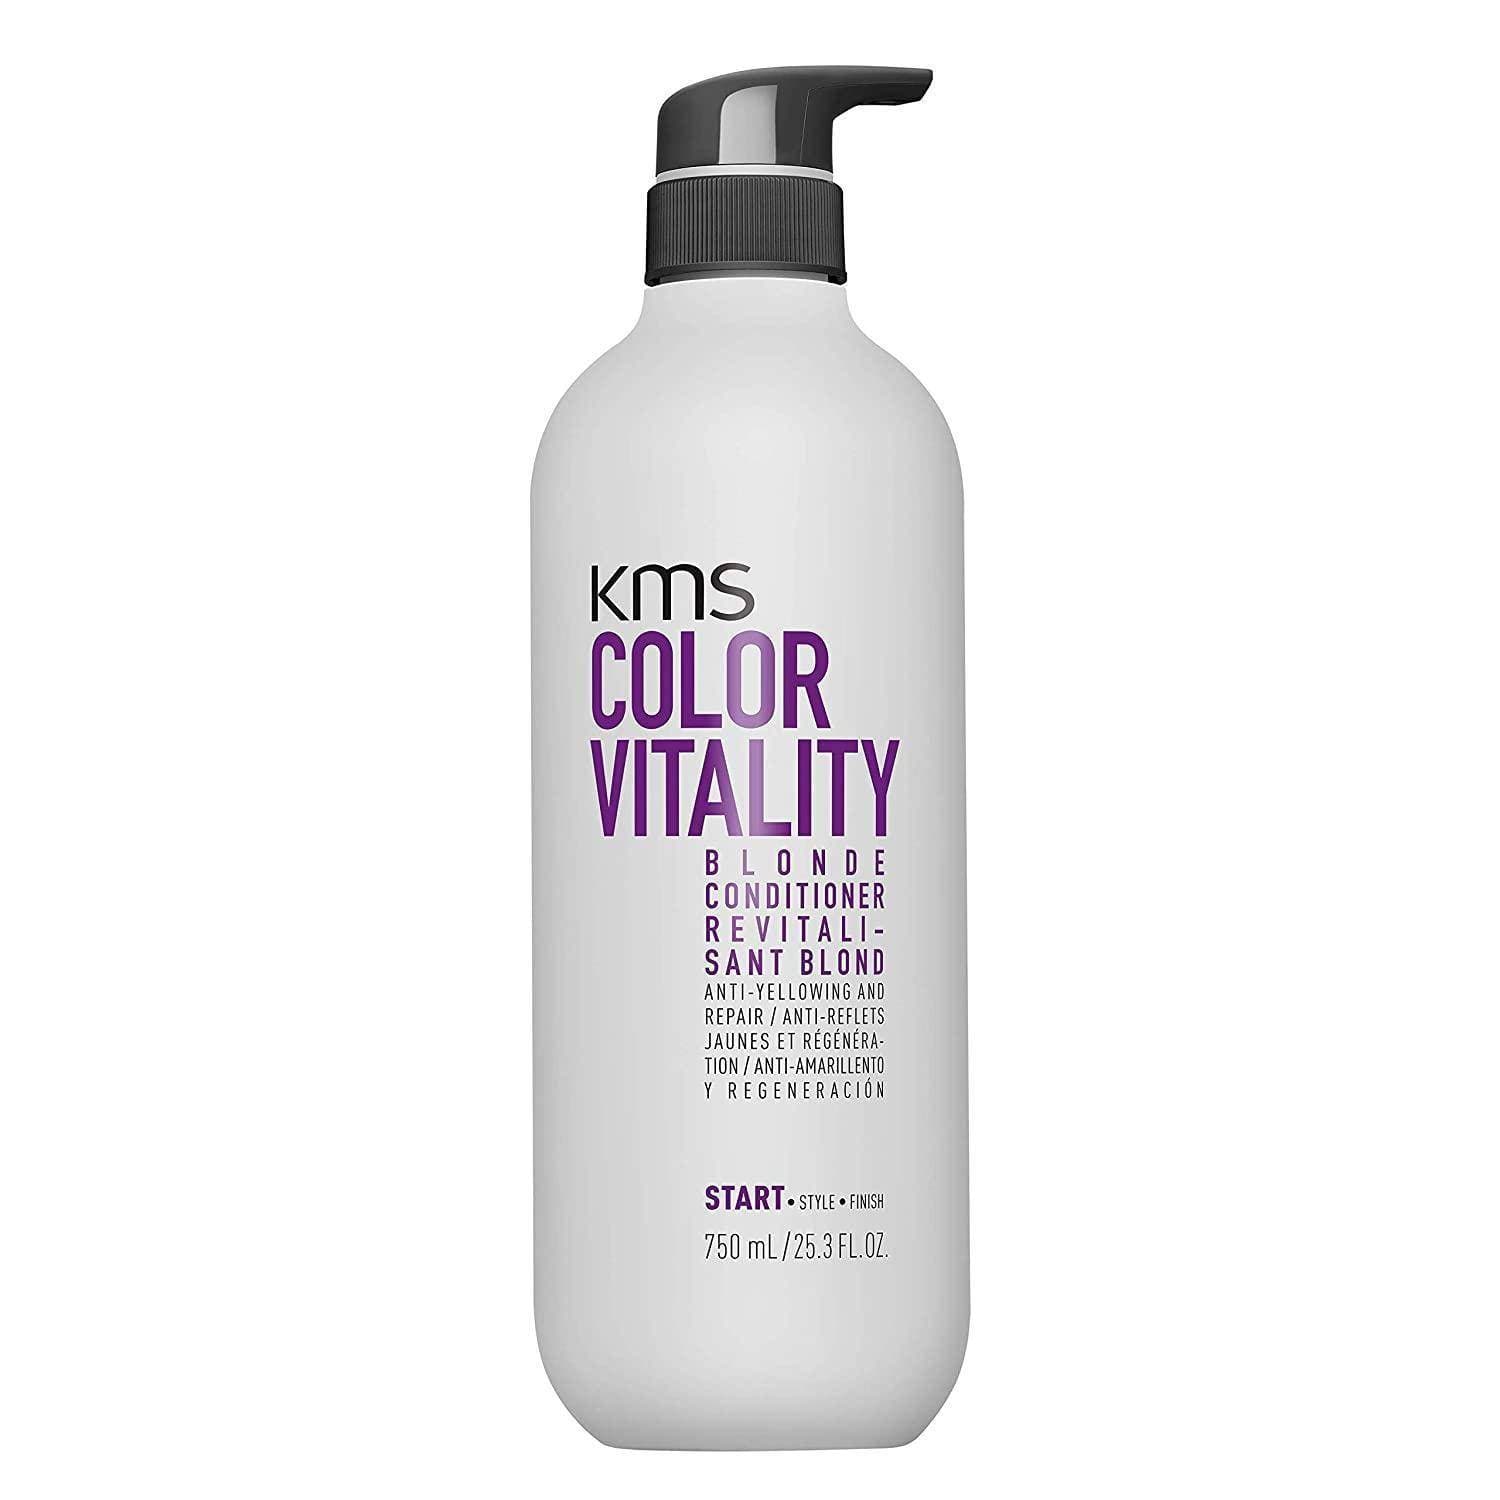 KMS ColorVitality Blonde Conditioner 25.3 oz